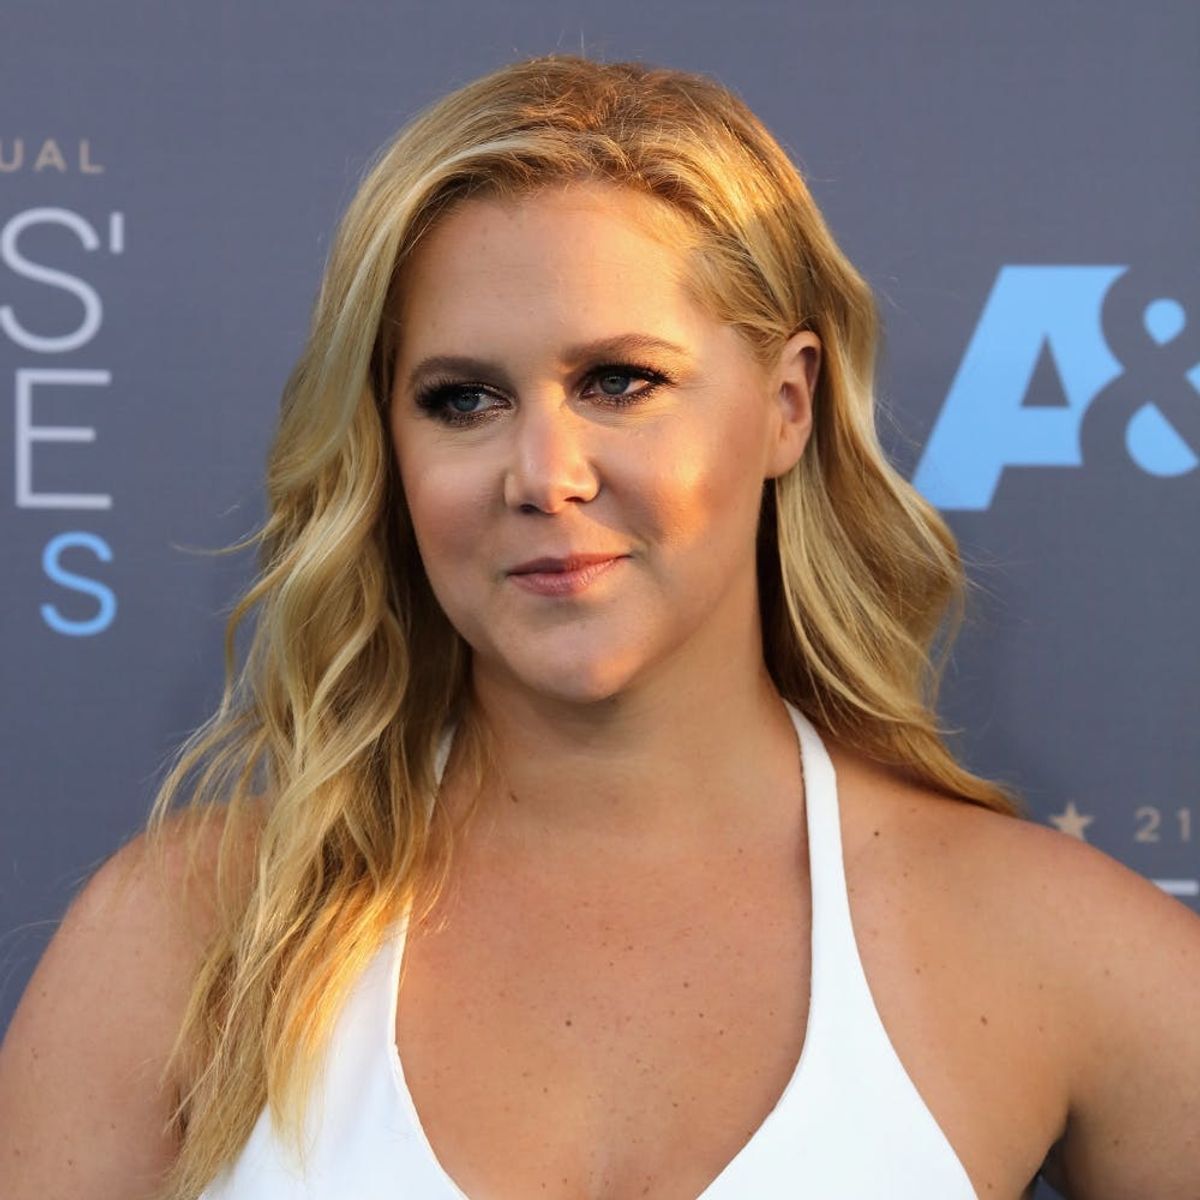 Amy Schumer Reveals the Surprising Thing She’s Most Afraid Of